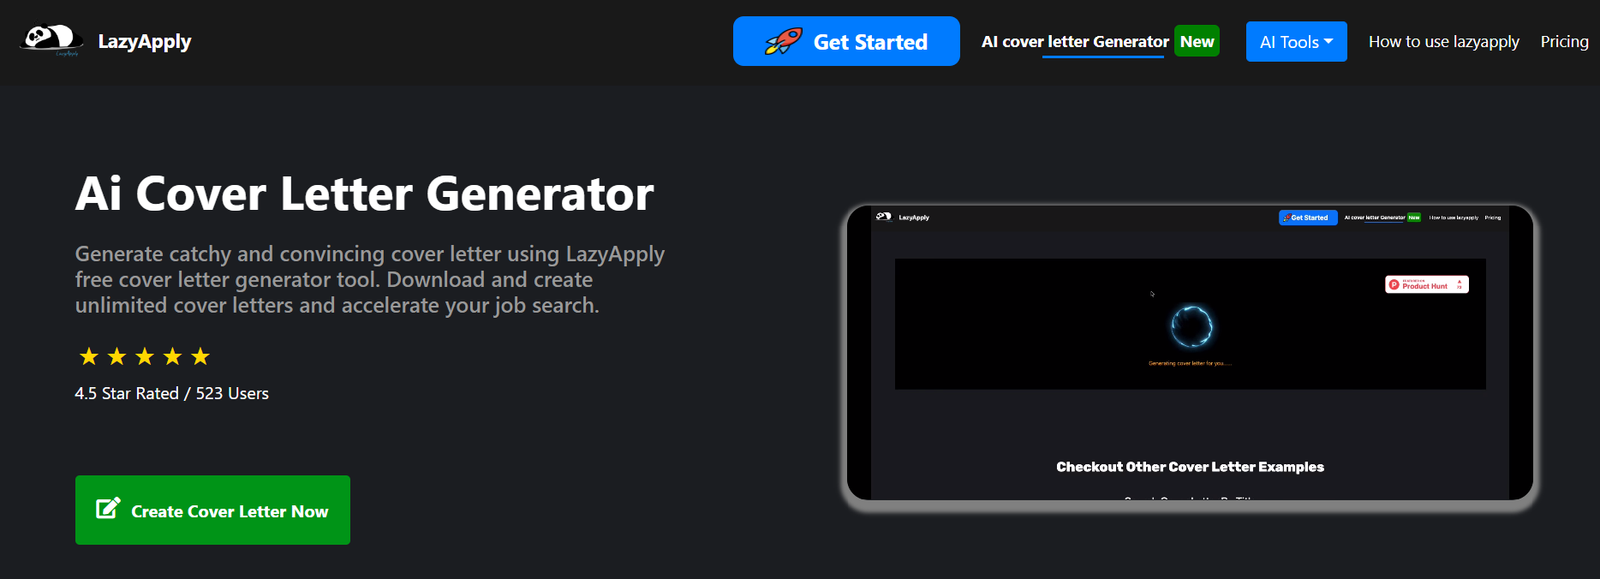 AI Cover Letter Generator by LazyApply